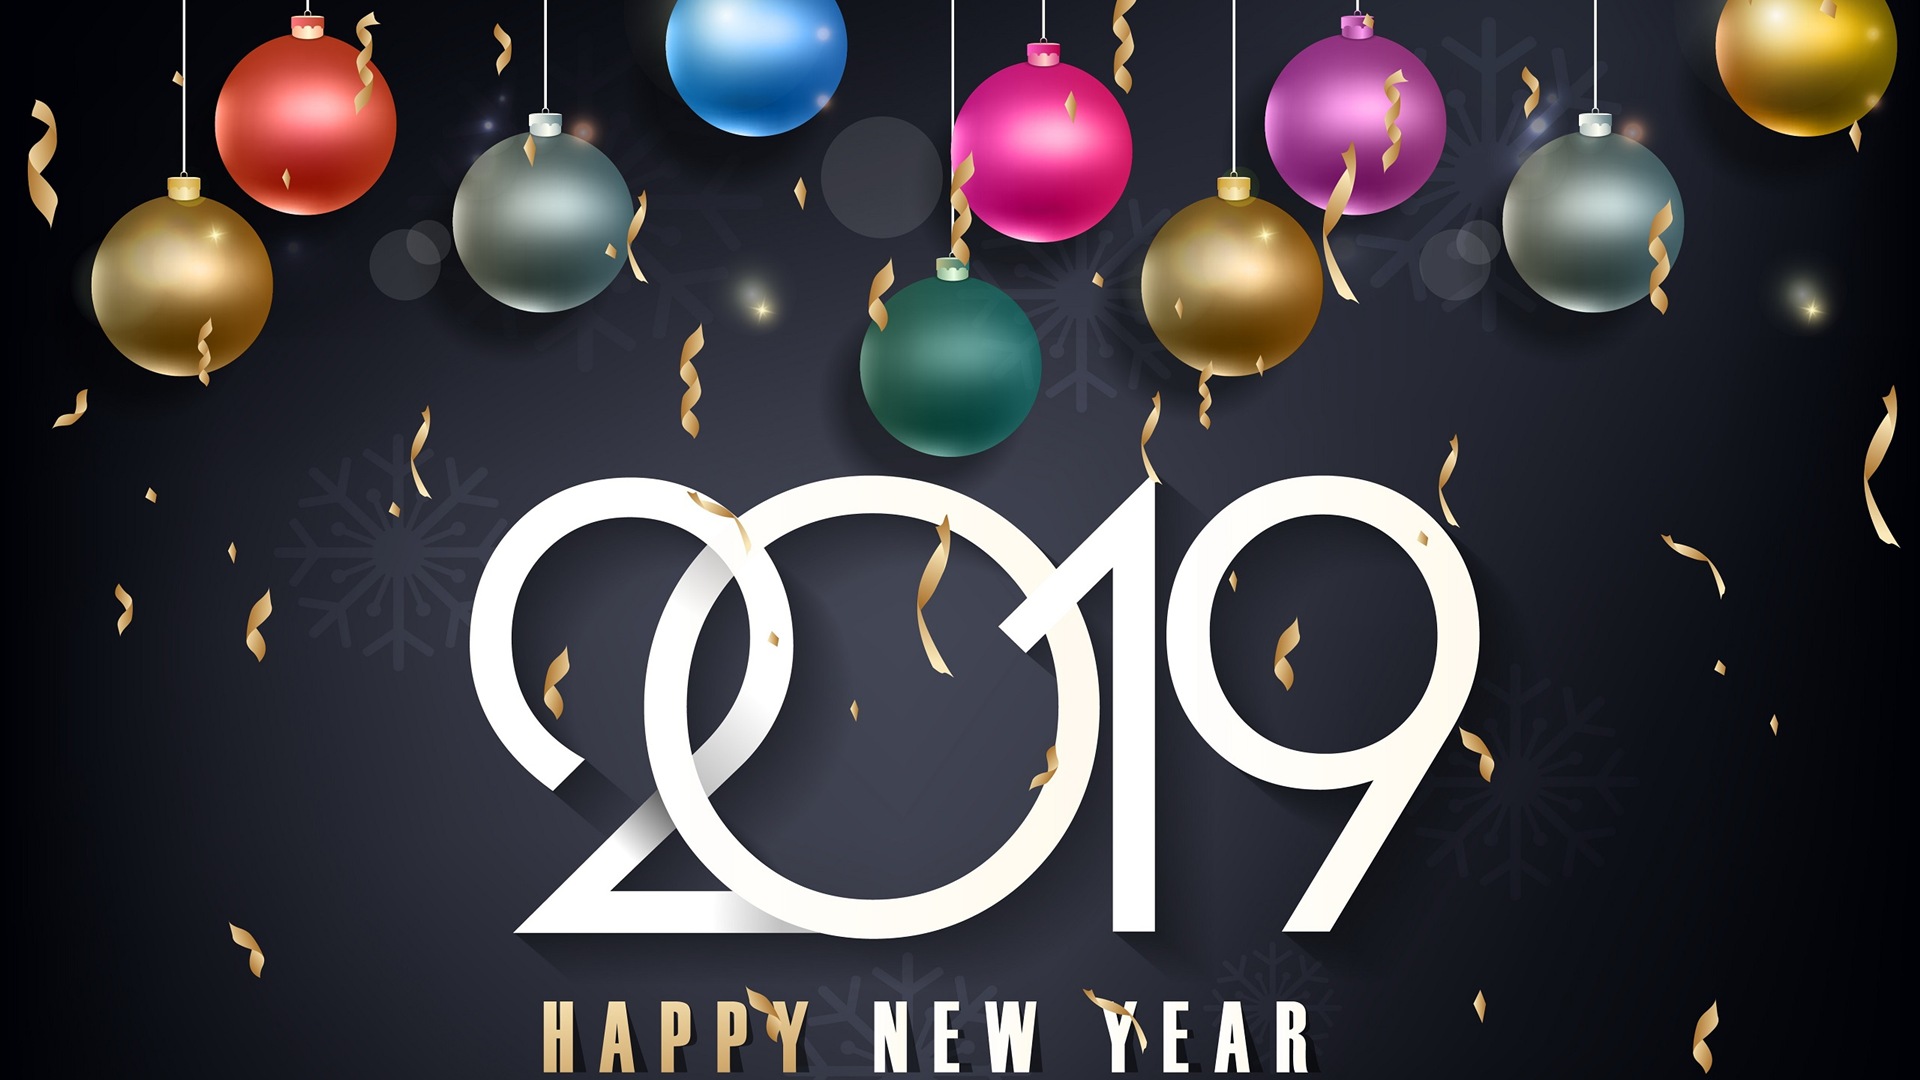 Happy New Year 2019 HD wallpapers #9 - 1920x1080